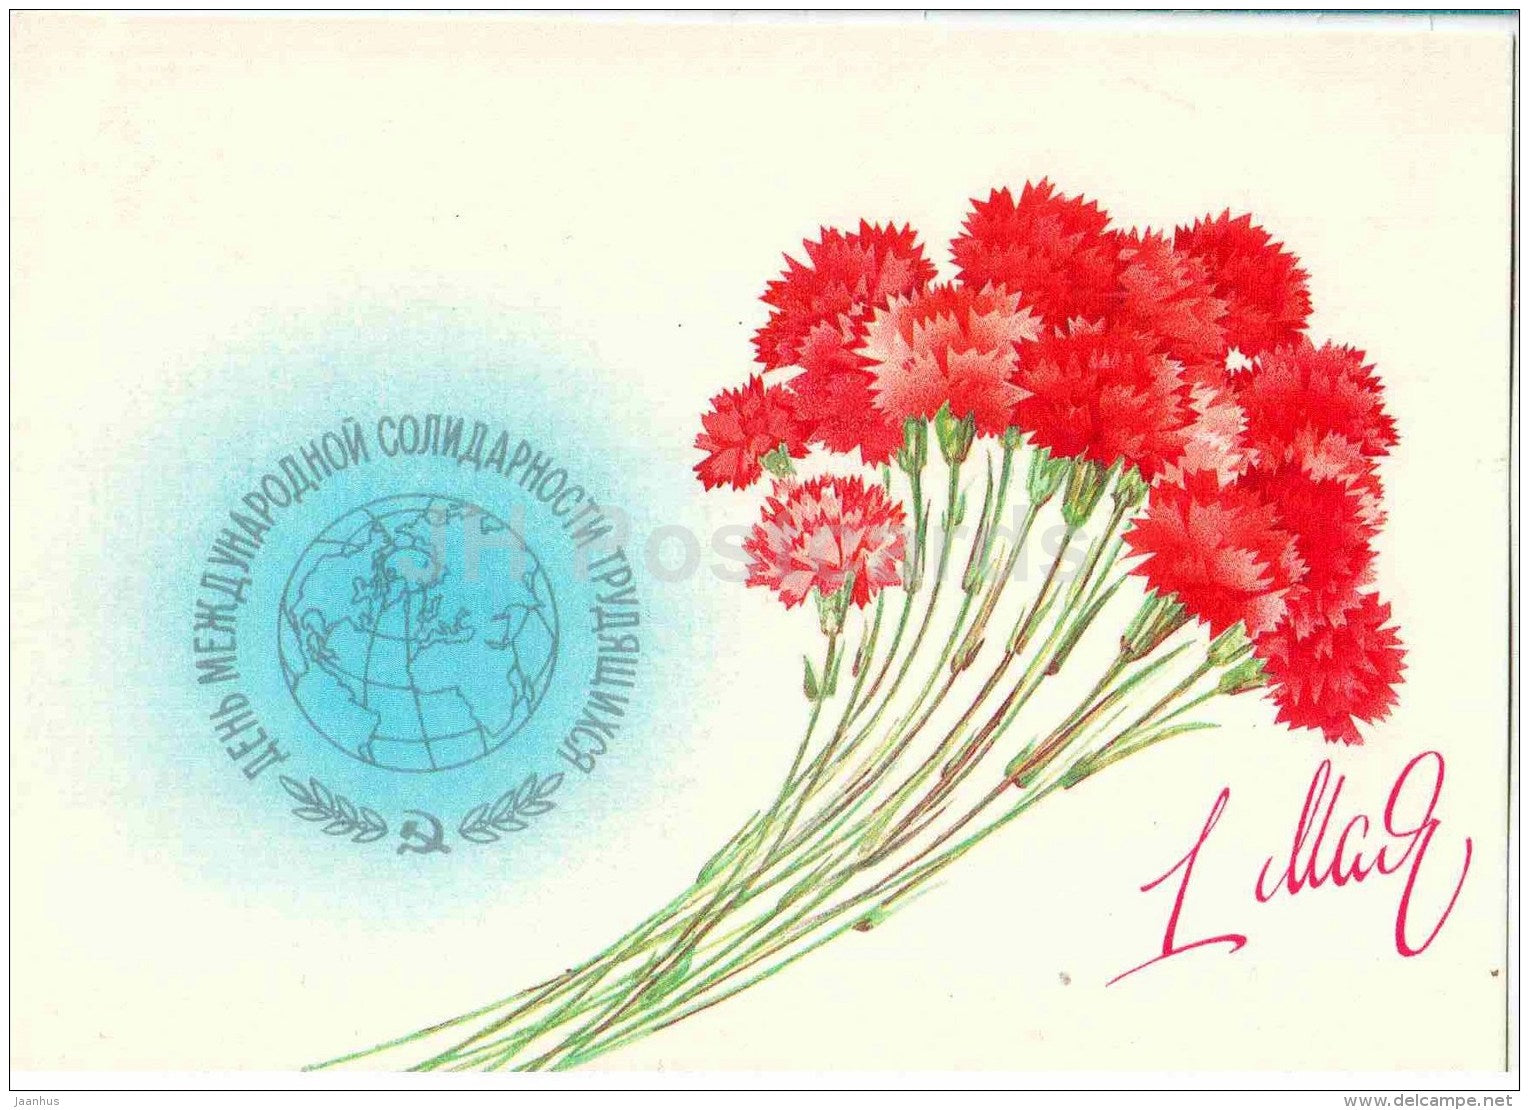 May 1 International Workers' Day greeting card - red carnations - globe - 1985 - Russia USSR - unused - JH Postcards